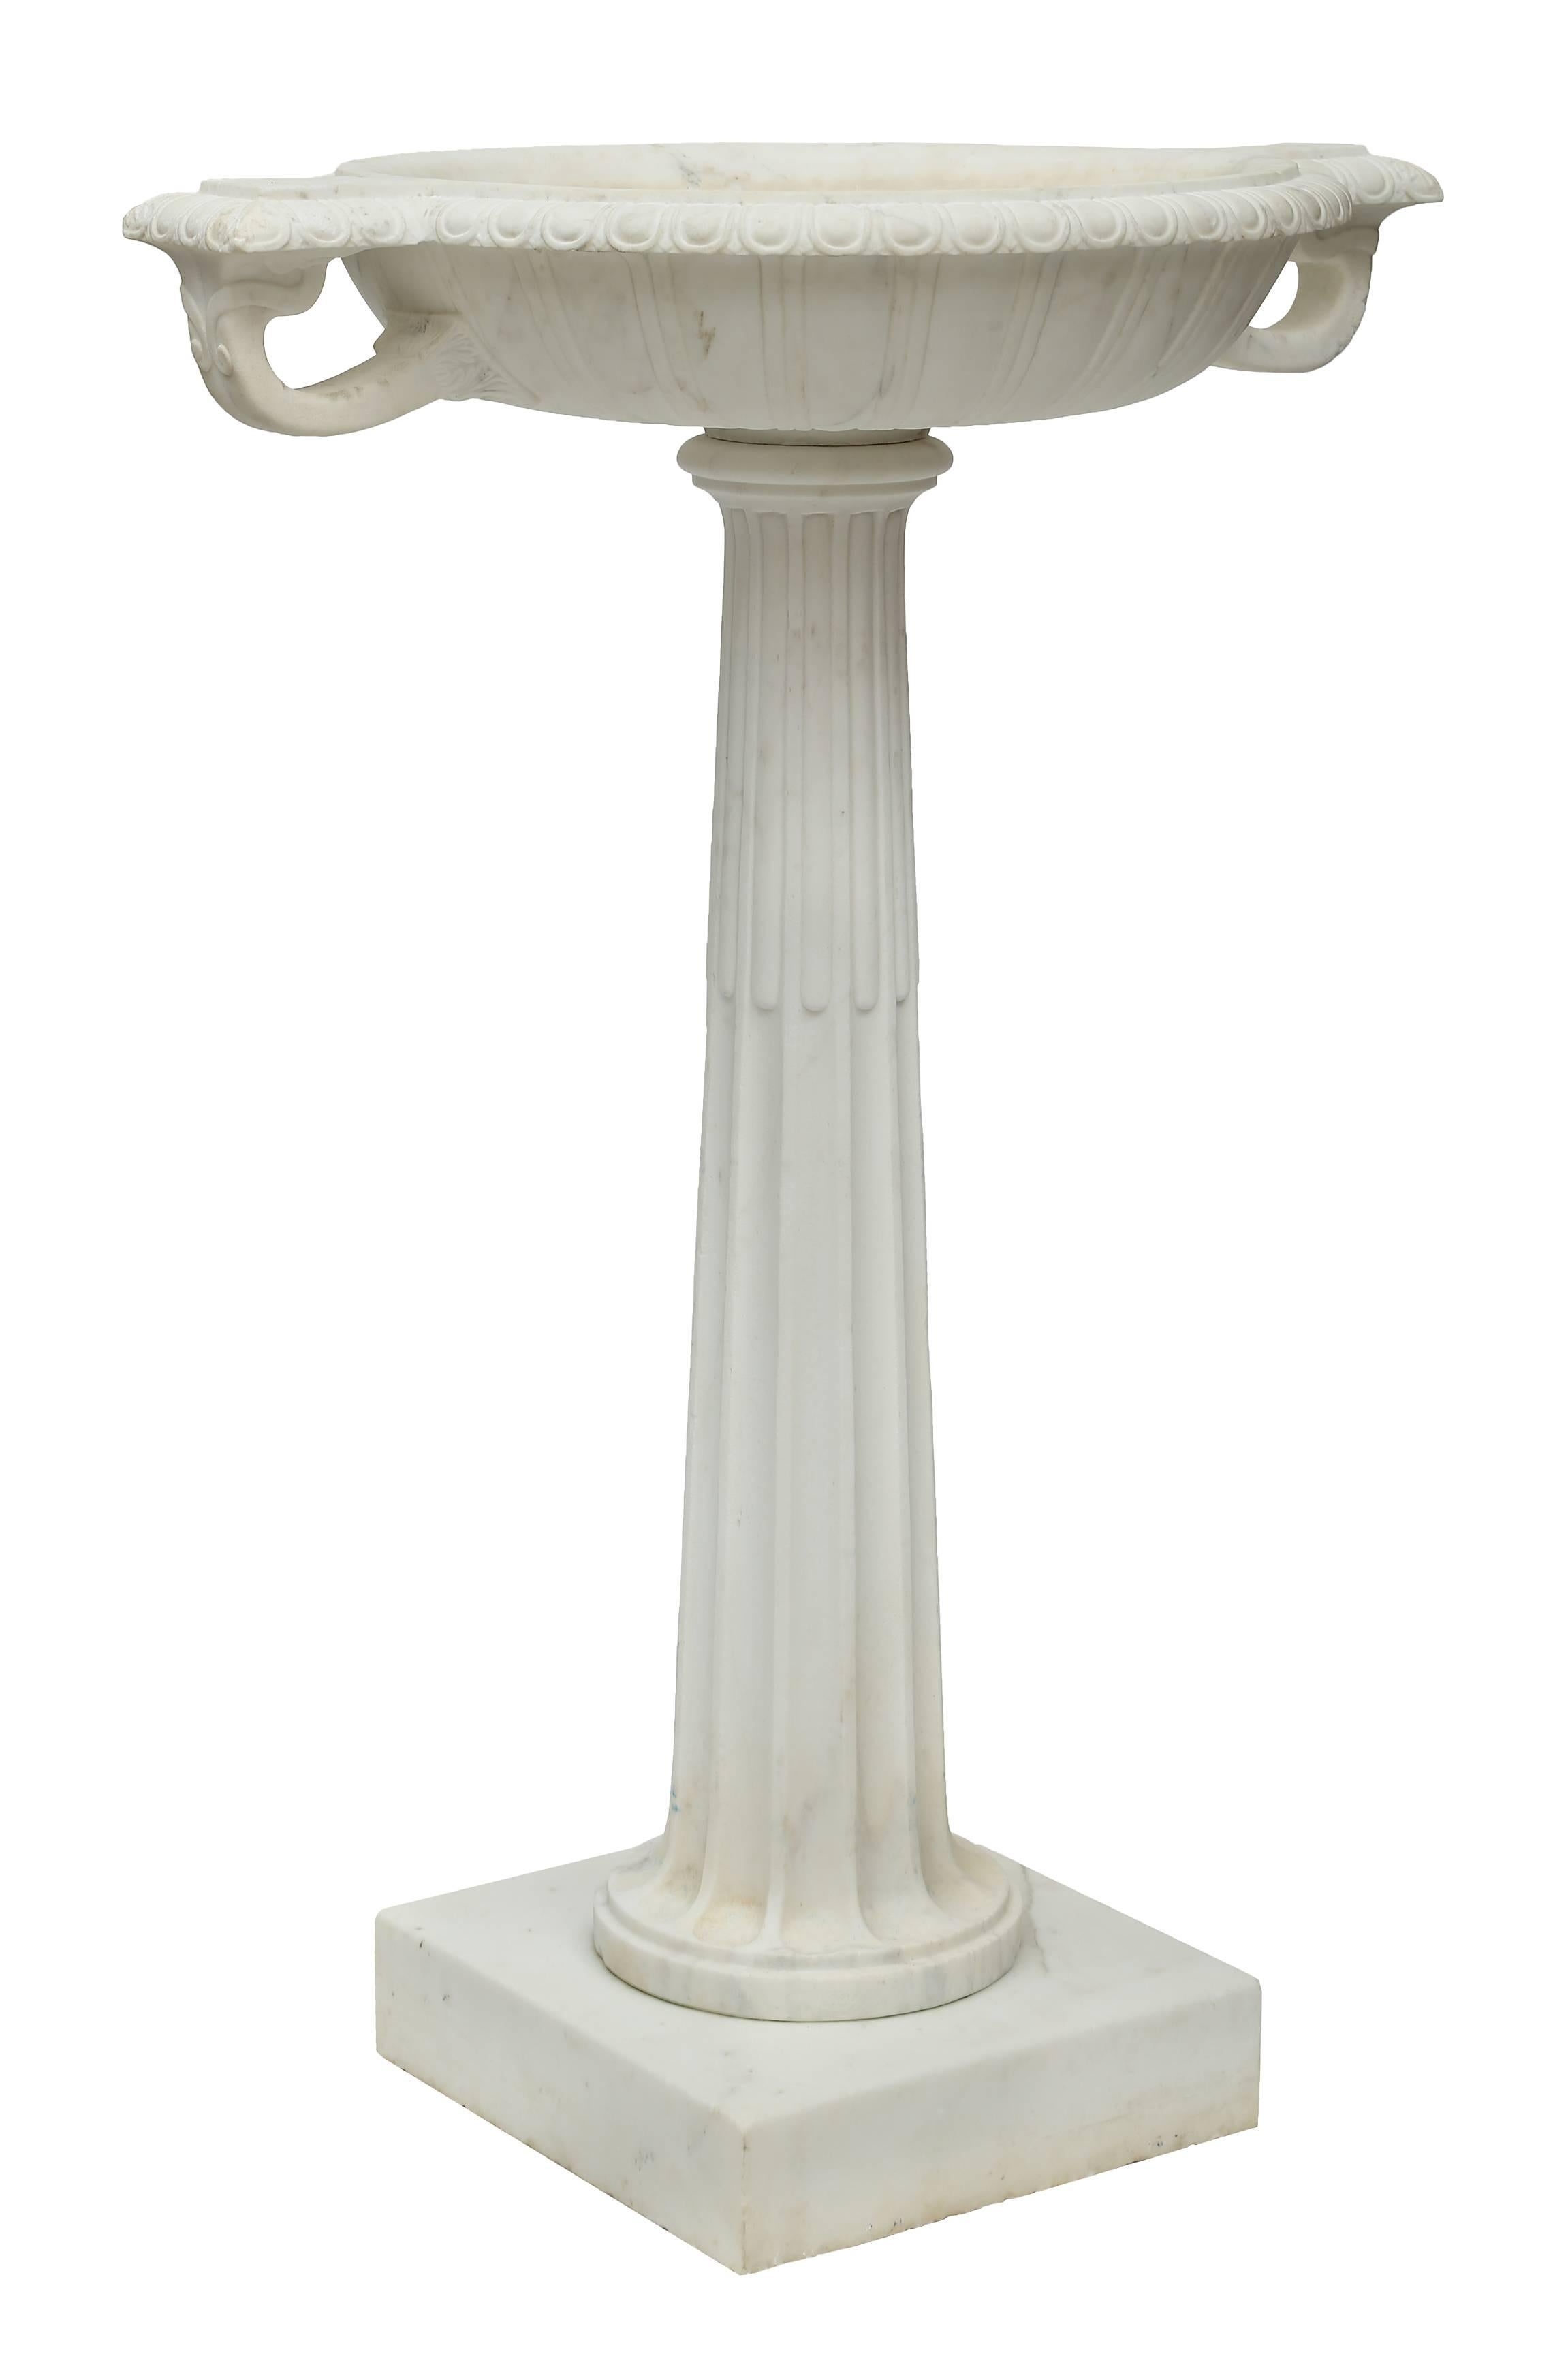 A superb Italian 19th century neoclassical style white Carrara marble bird bath. This elegant bird bath is raised on a solid square white Carrara marble base. Above is the tapered fluted and reeded column. At the top is the wide tazza designed oval